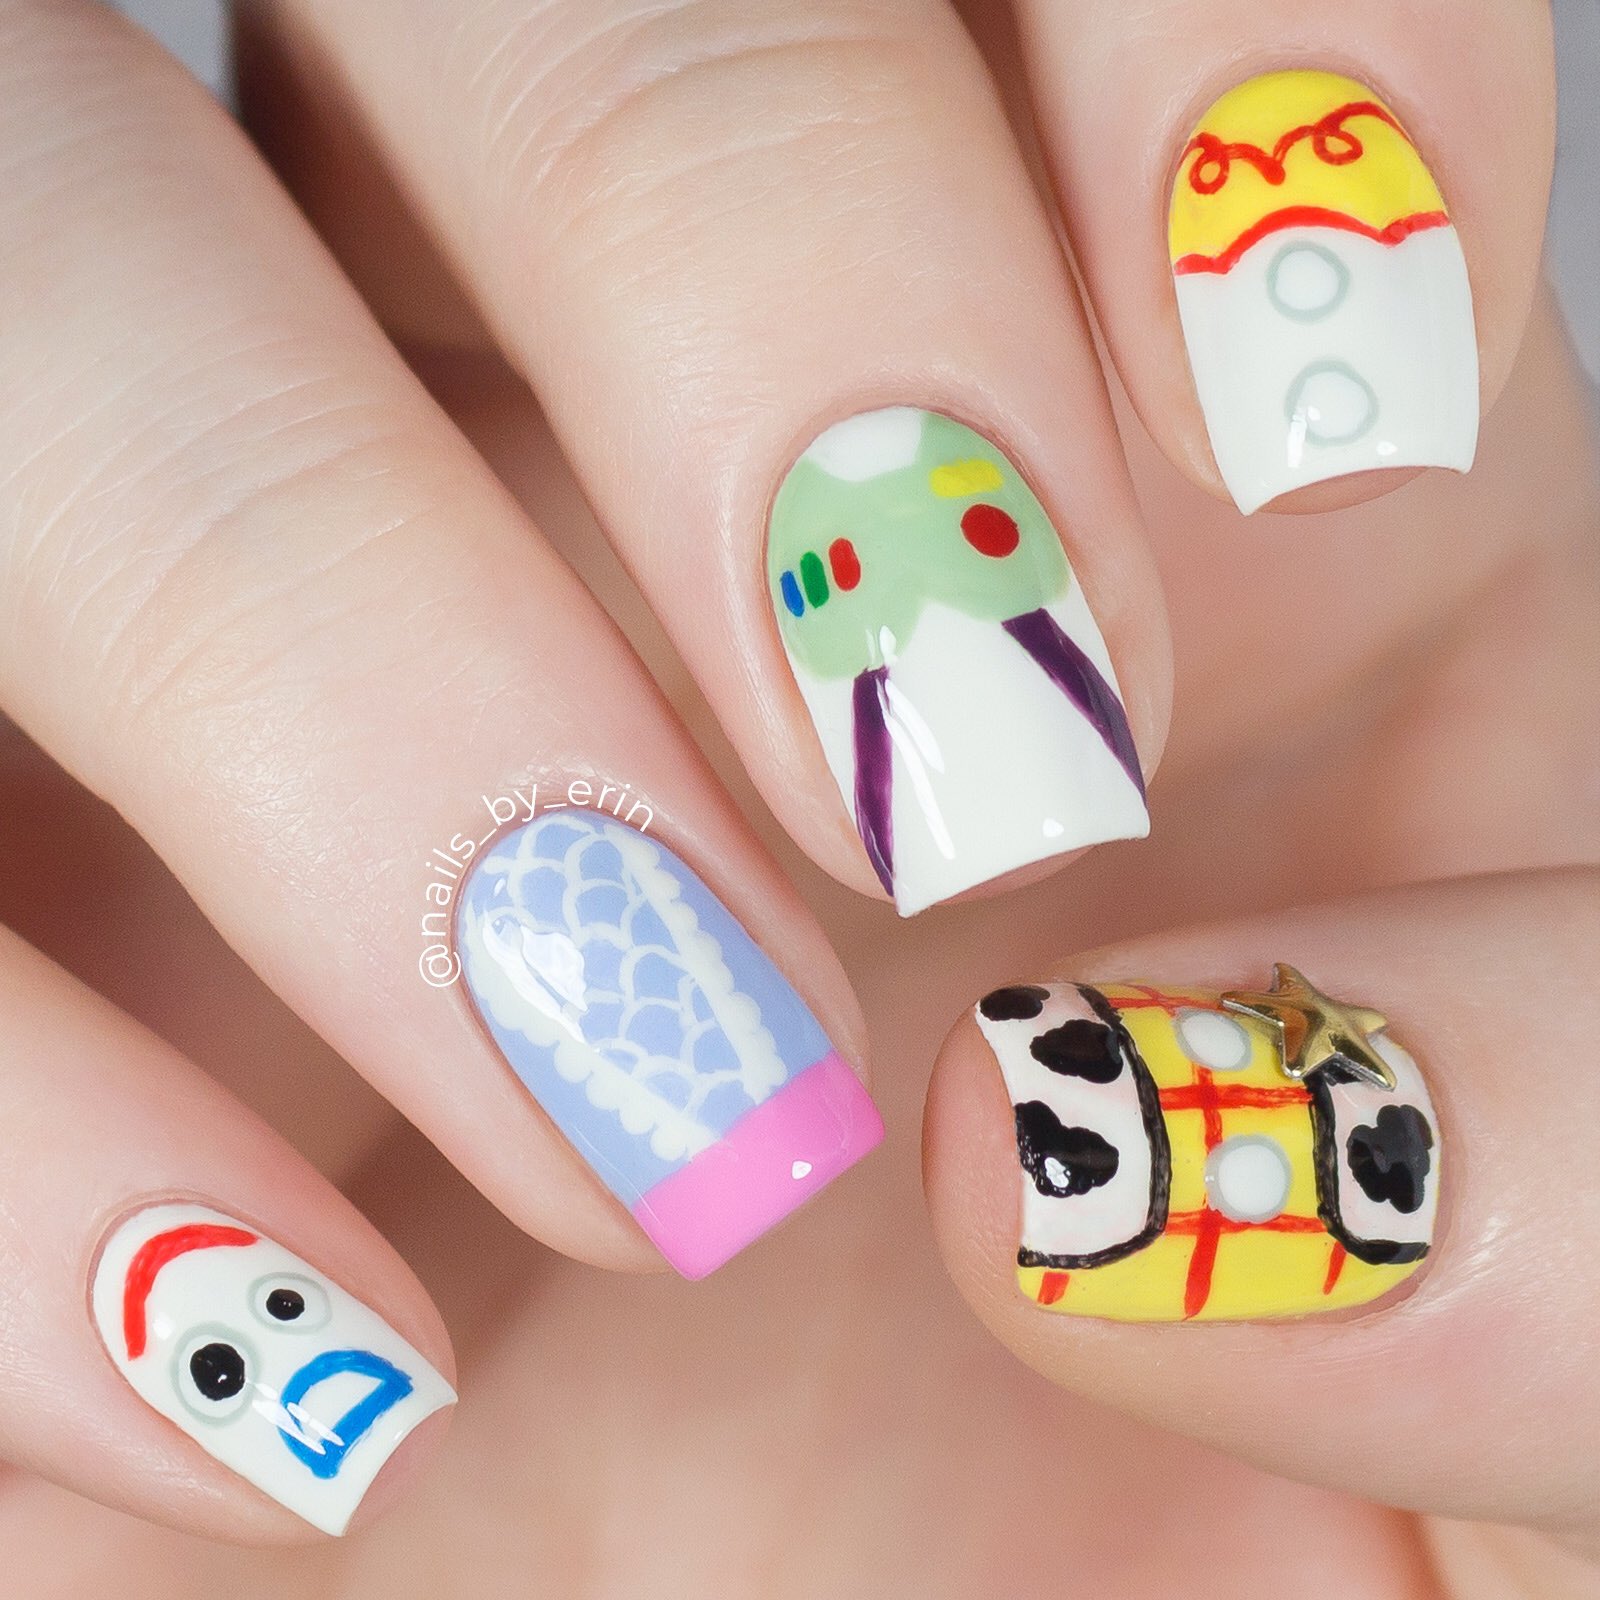 You've Got a Friend In Me! - Toy Story Nail Art | Toy story nails, Disney  acrylic nails, Nail art disney